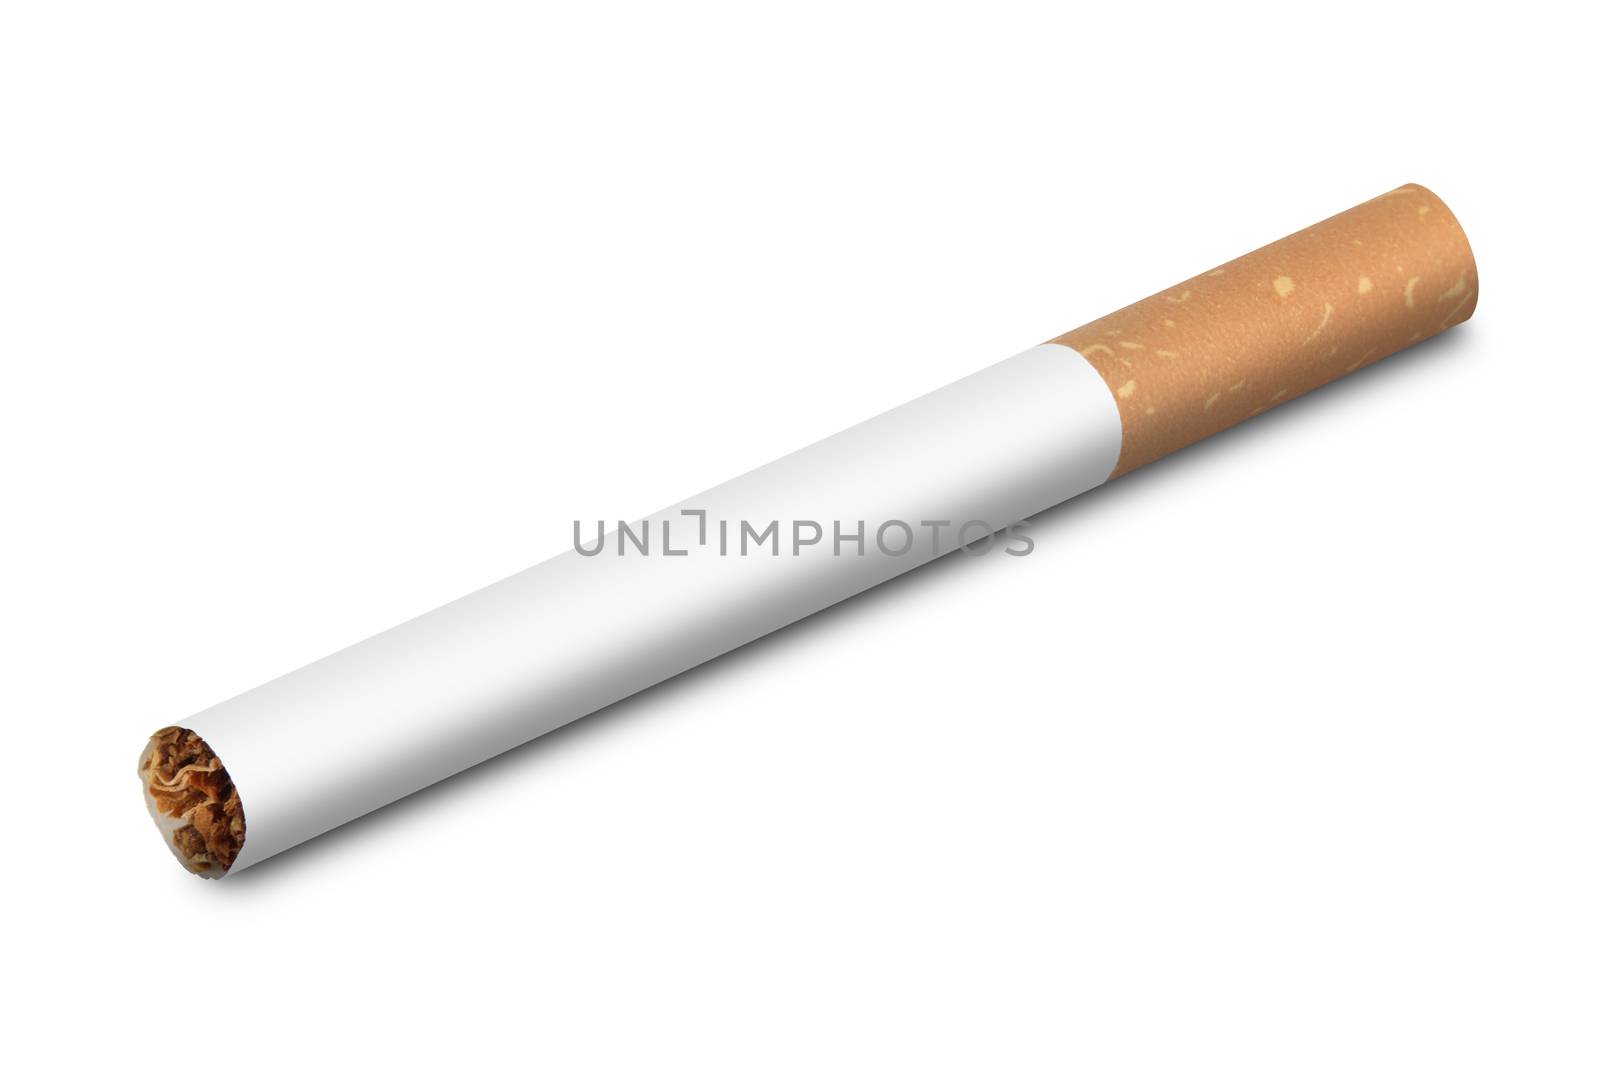 A Cigarette inclined on white with clipping path